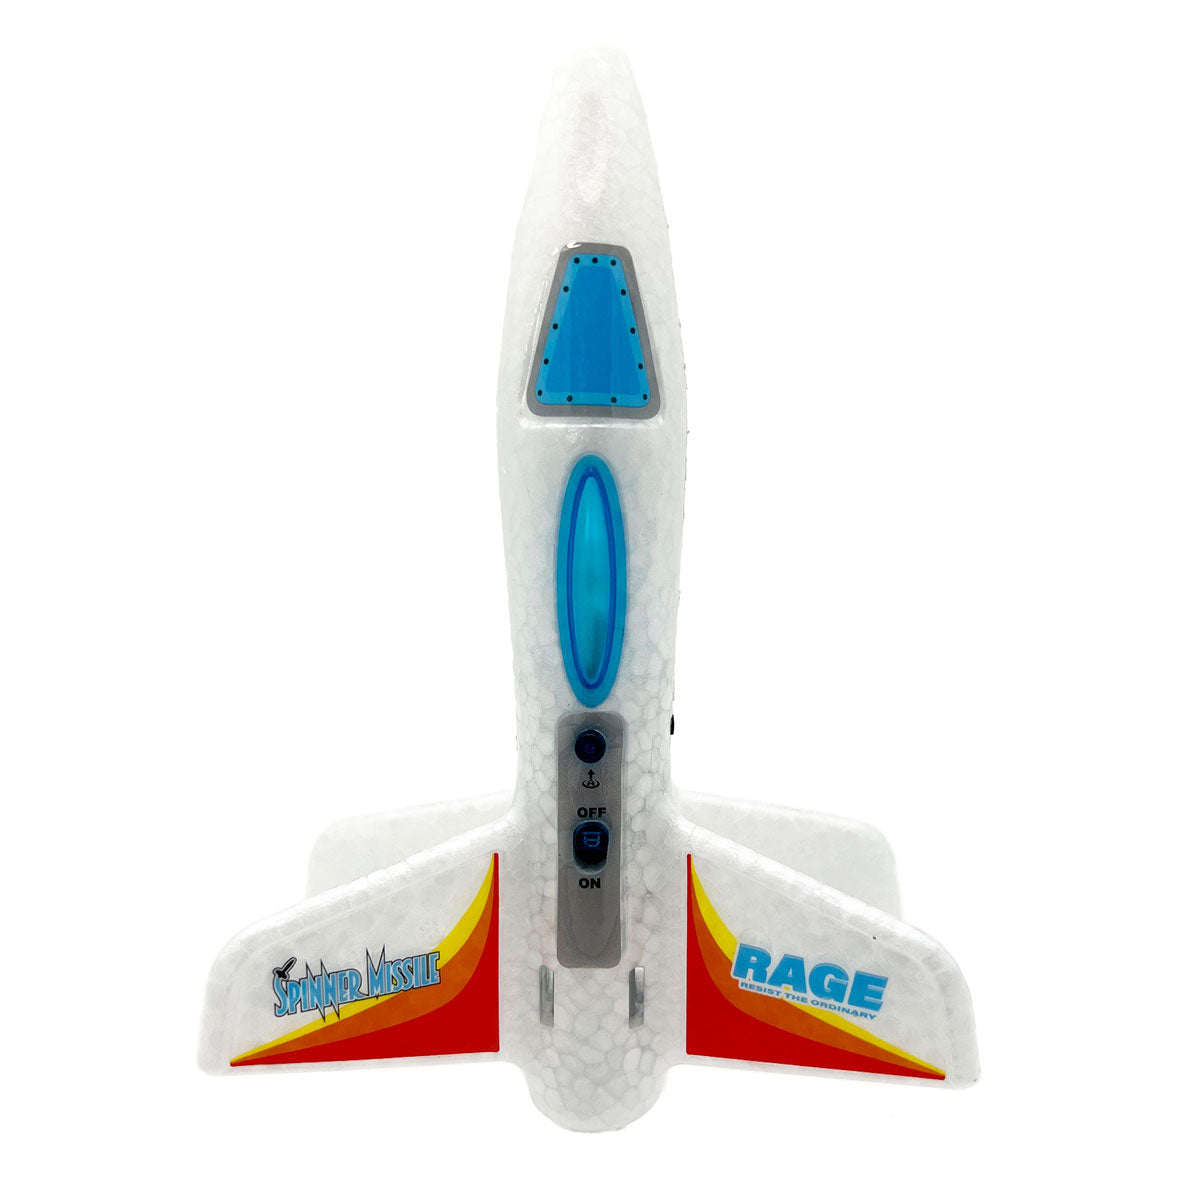 Rage RC Spinner Missile - White Electric Free-Flight Rocket